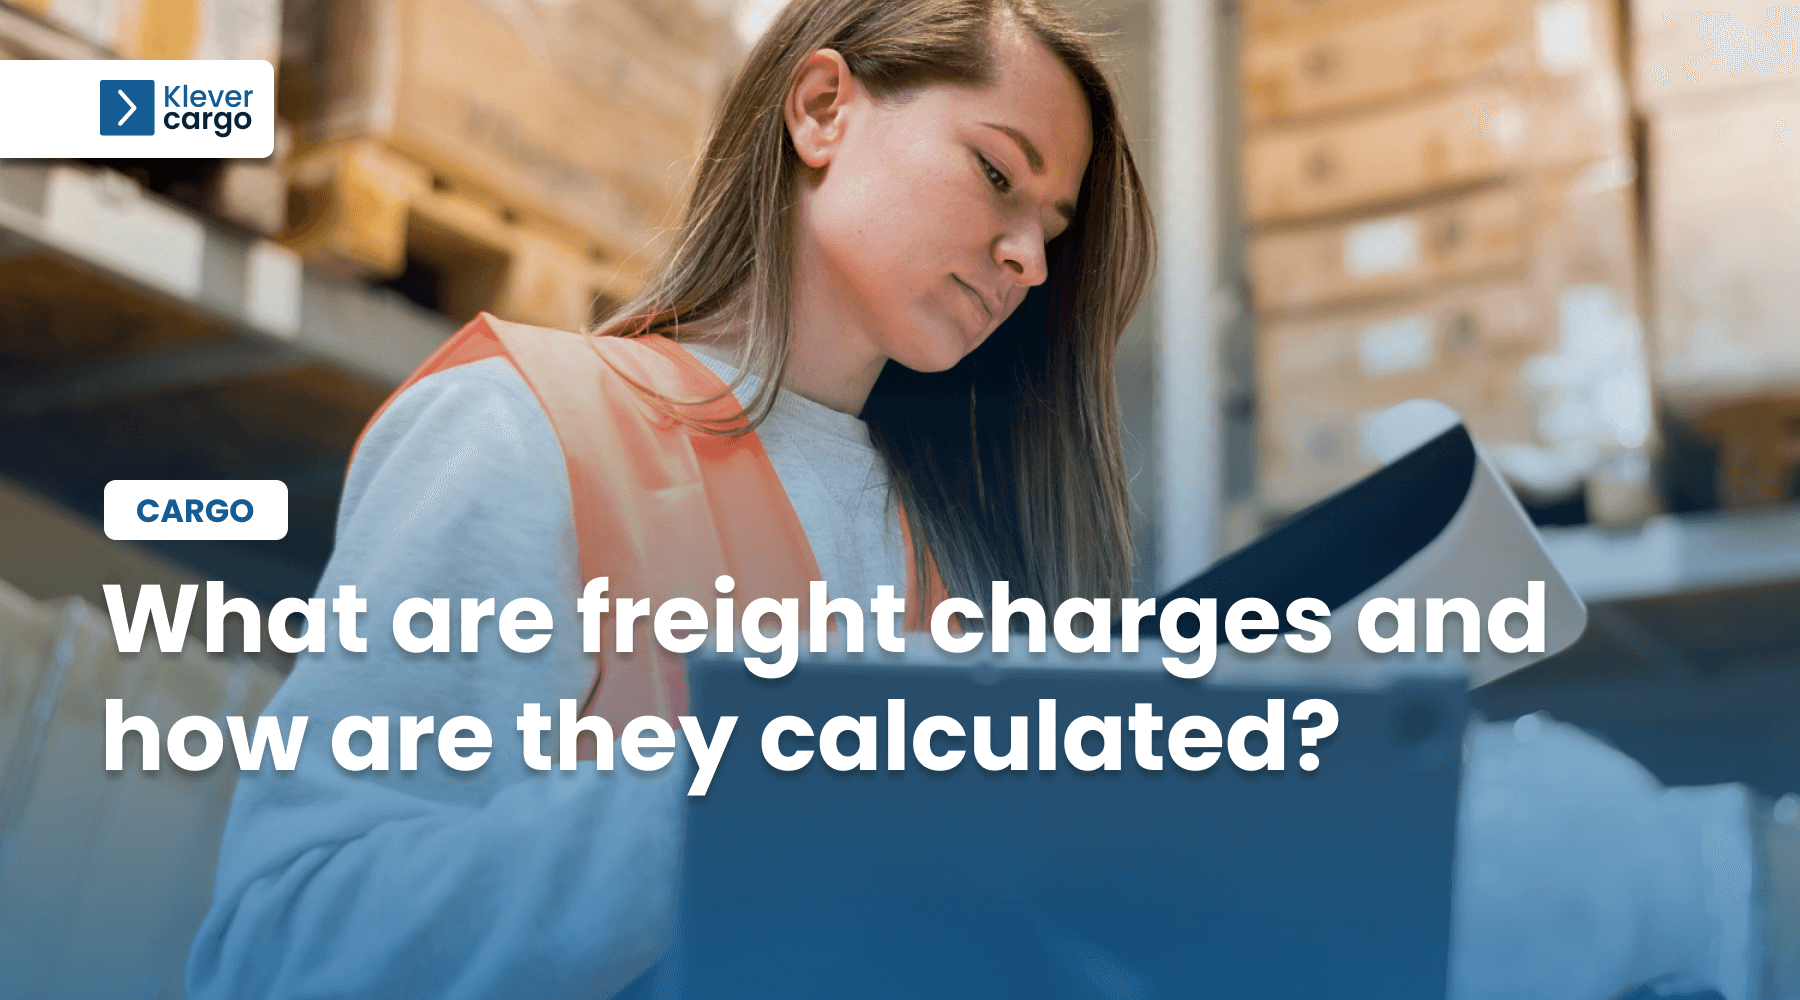 What are freight charges and how are they calculated?